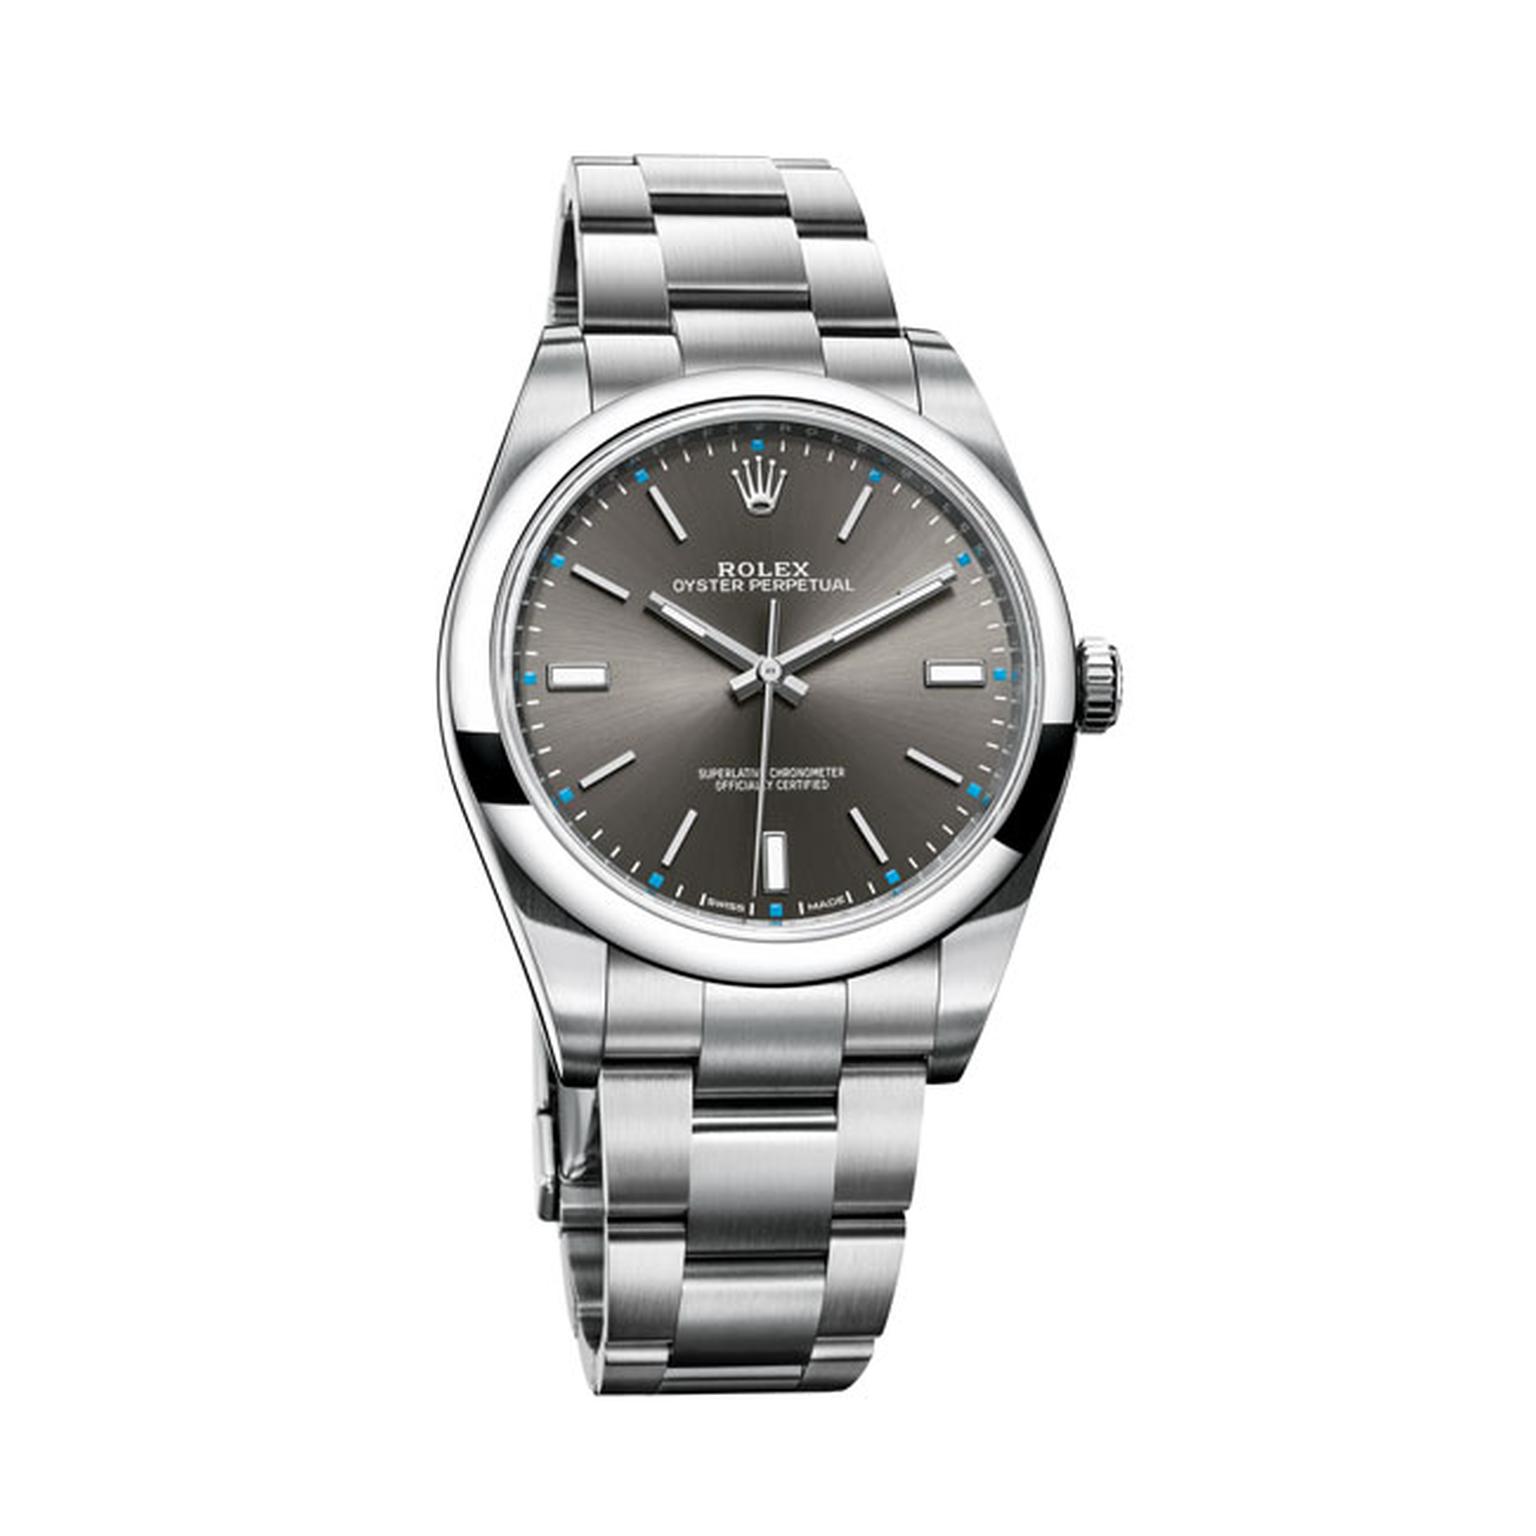 Rolex Oyster Perpetual 39mm watch